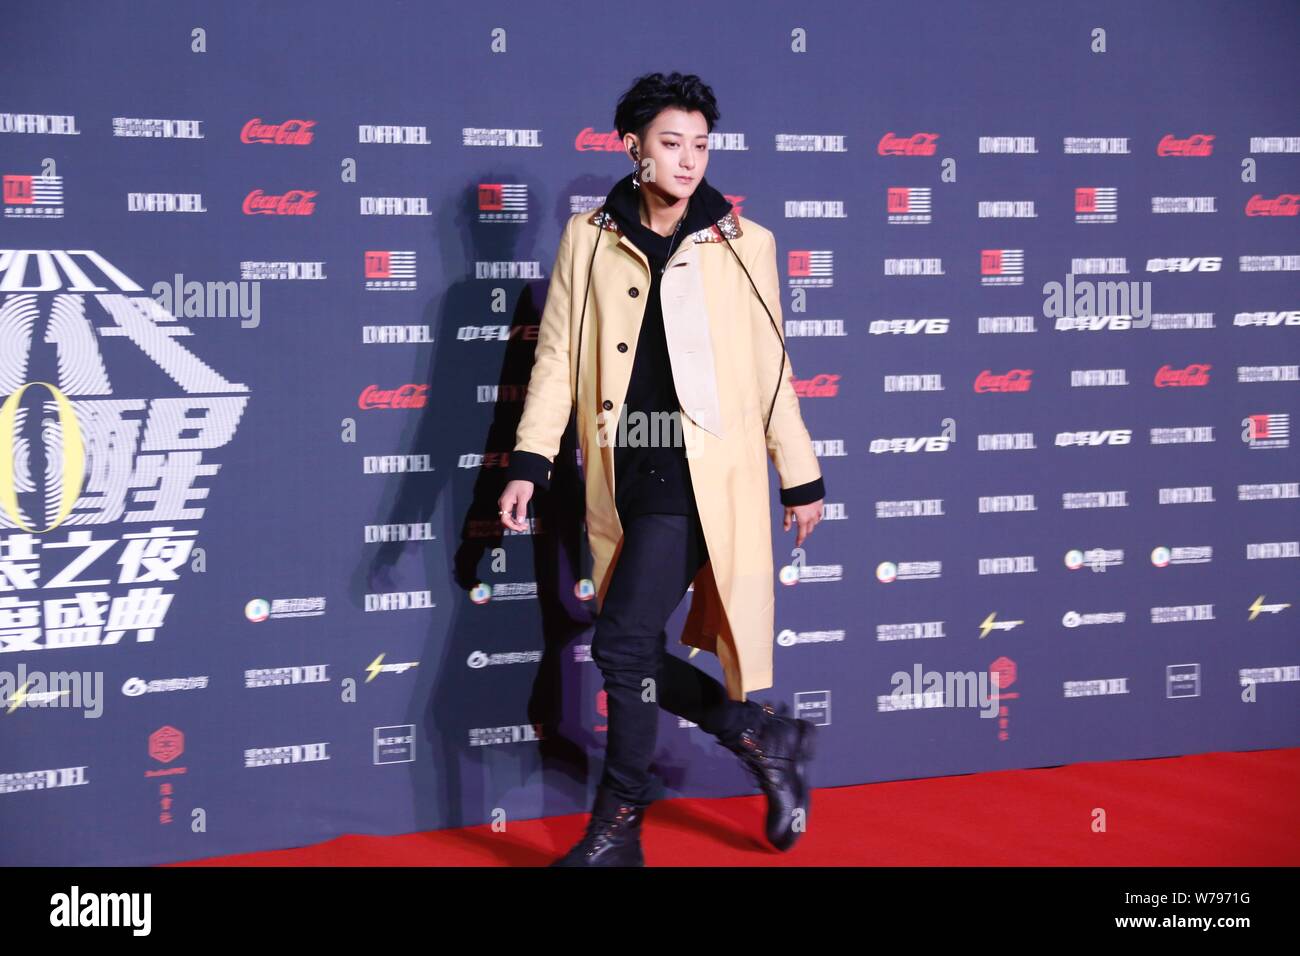 Chinese singer and actor Huang Zitao, better known as Z.Tao, poses as he  arrives at the red carpet for Lofficiel Fashion Night 2017 in Beijing,  China Stock Photo - Alamy